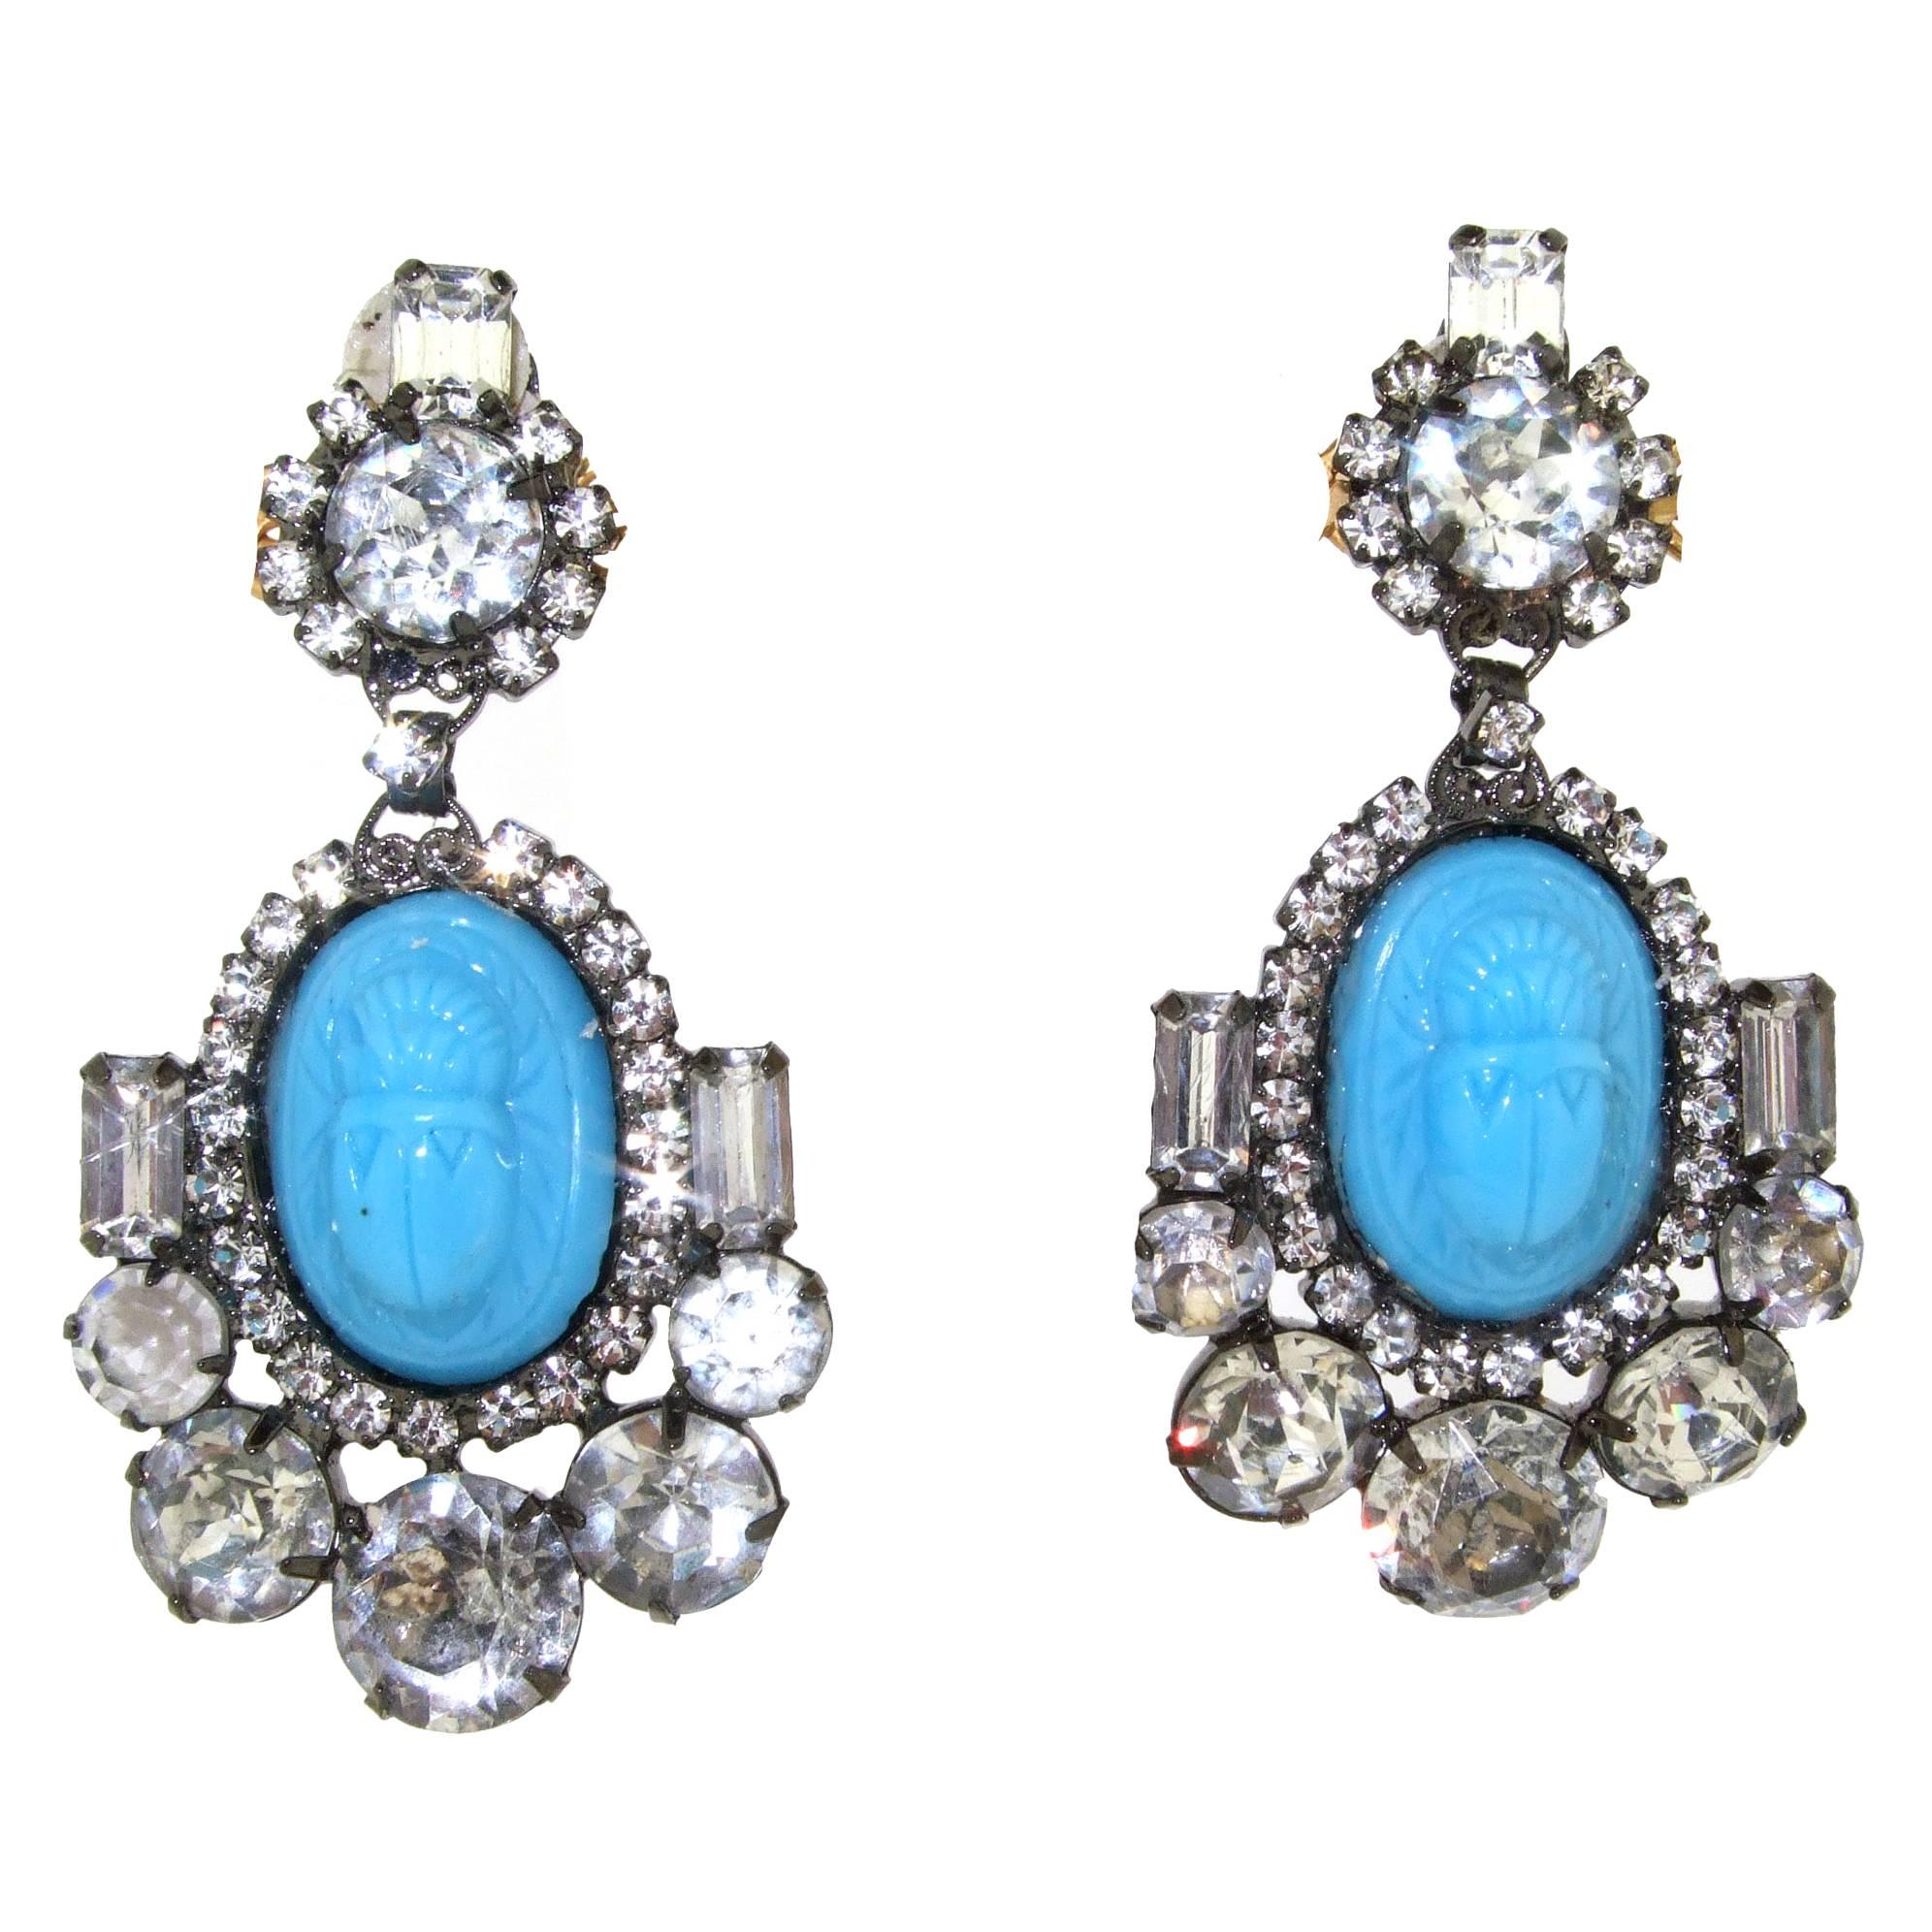 Turquoise glass scarab chandelier earrings by Moans Couture.